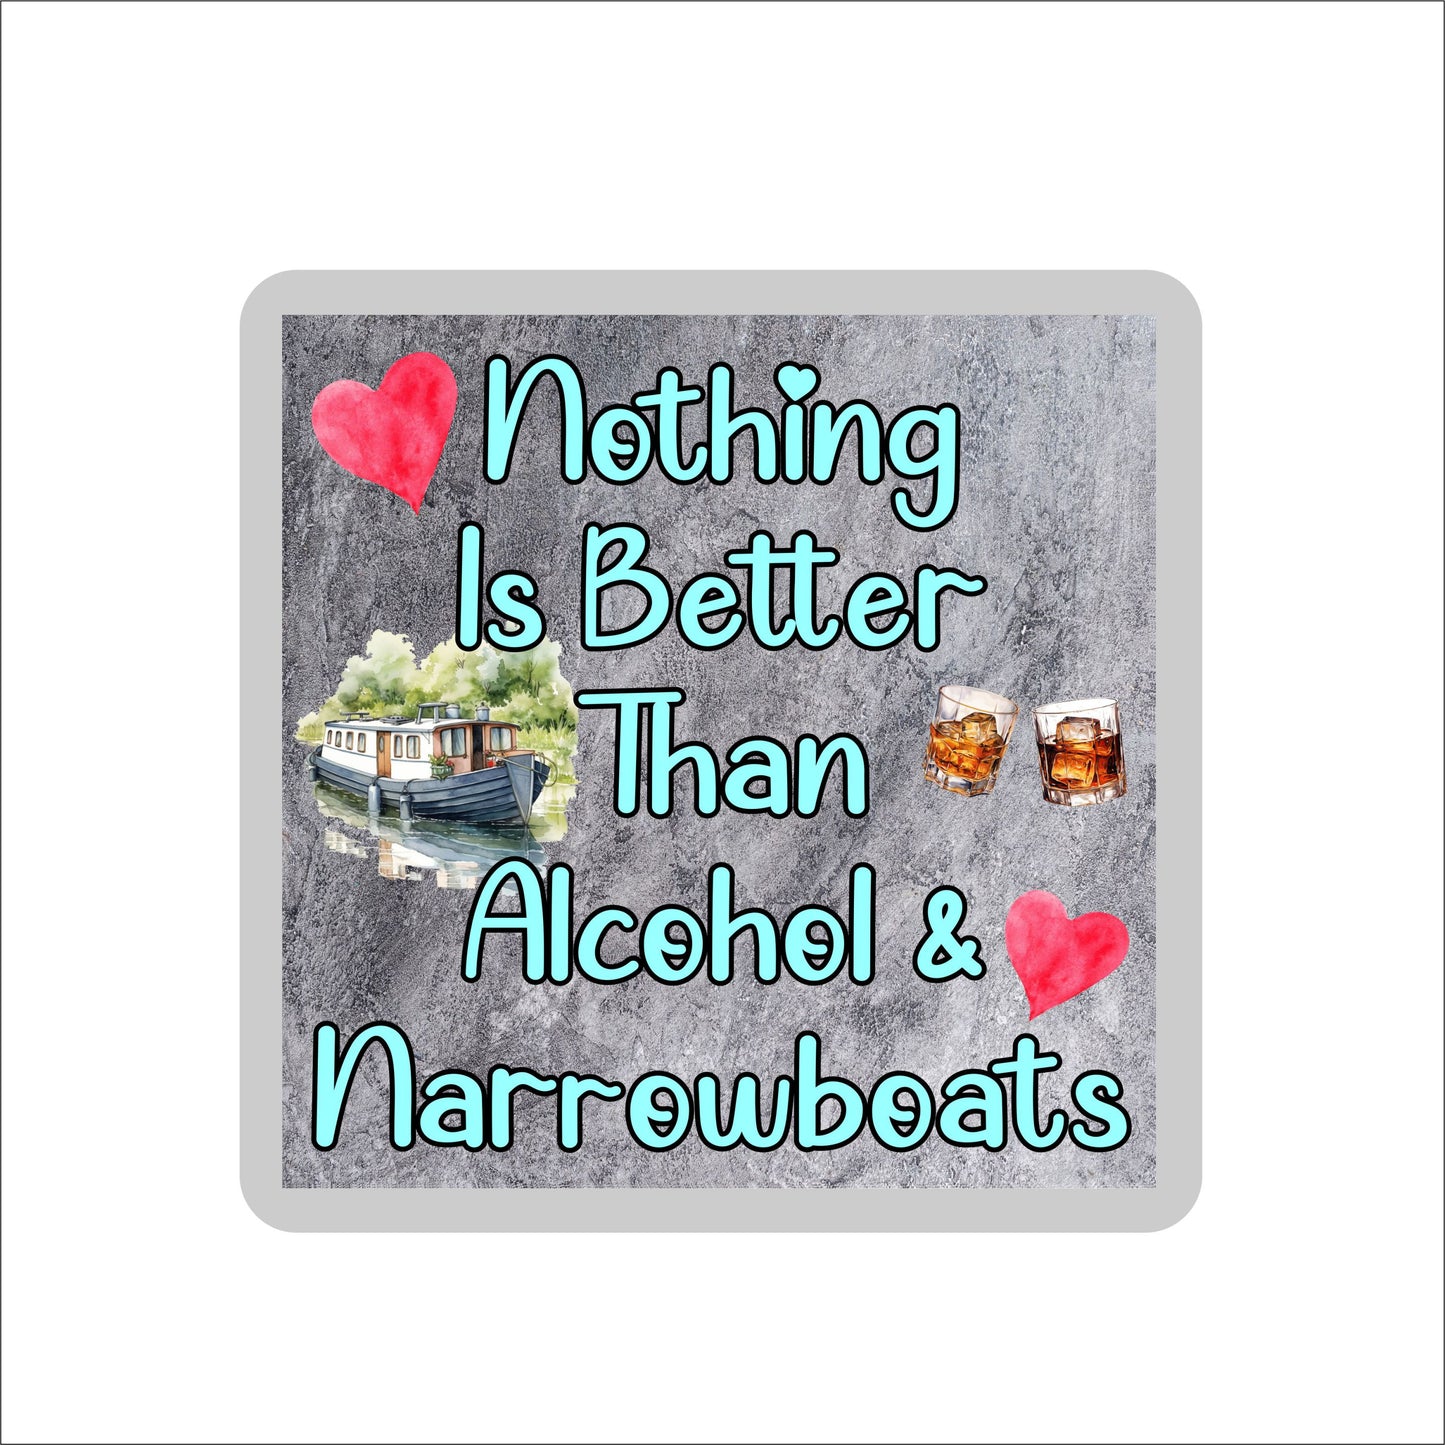 Narrowboat Coaster Gift - Nothing Is Better Than Alcohol And Narrowboats - Cute Fun Novelty Canal Boat Present